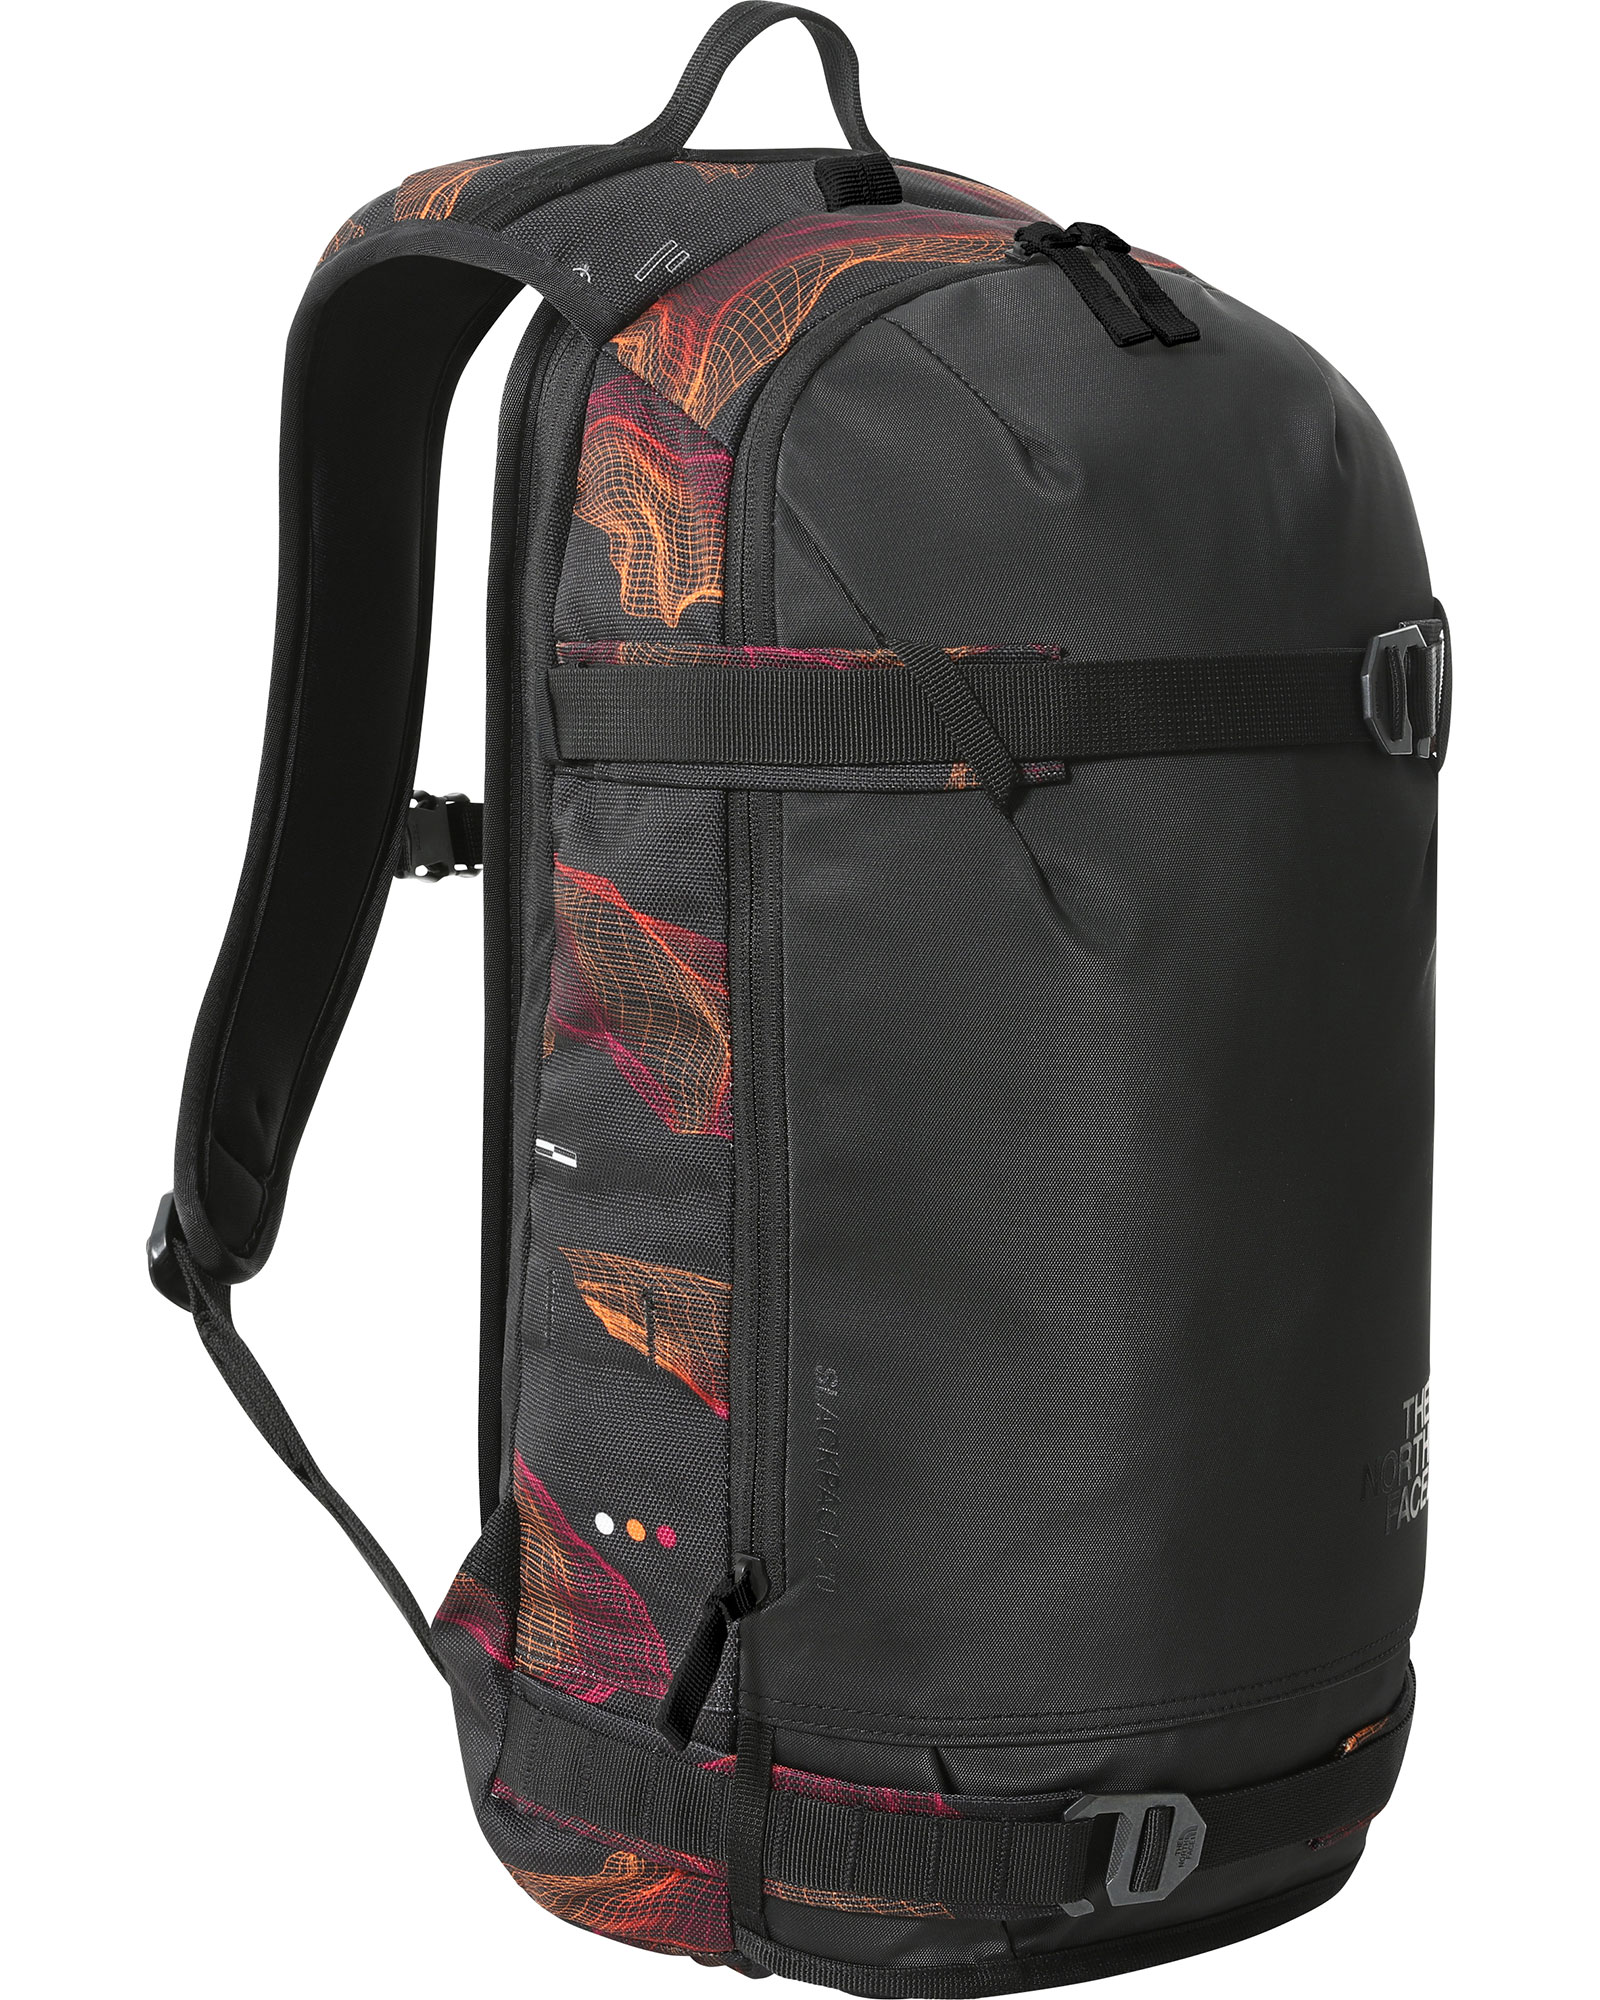 The North Face Women's Slackpack 2.0 Expedition Backpack